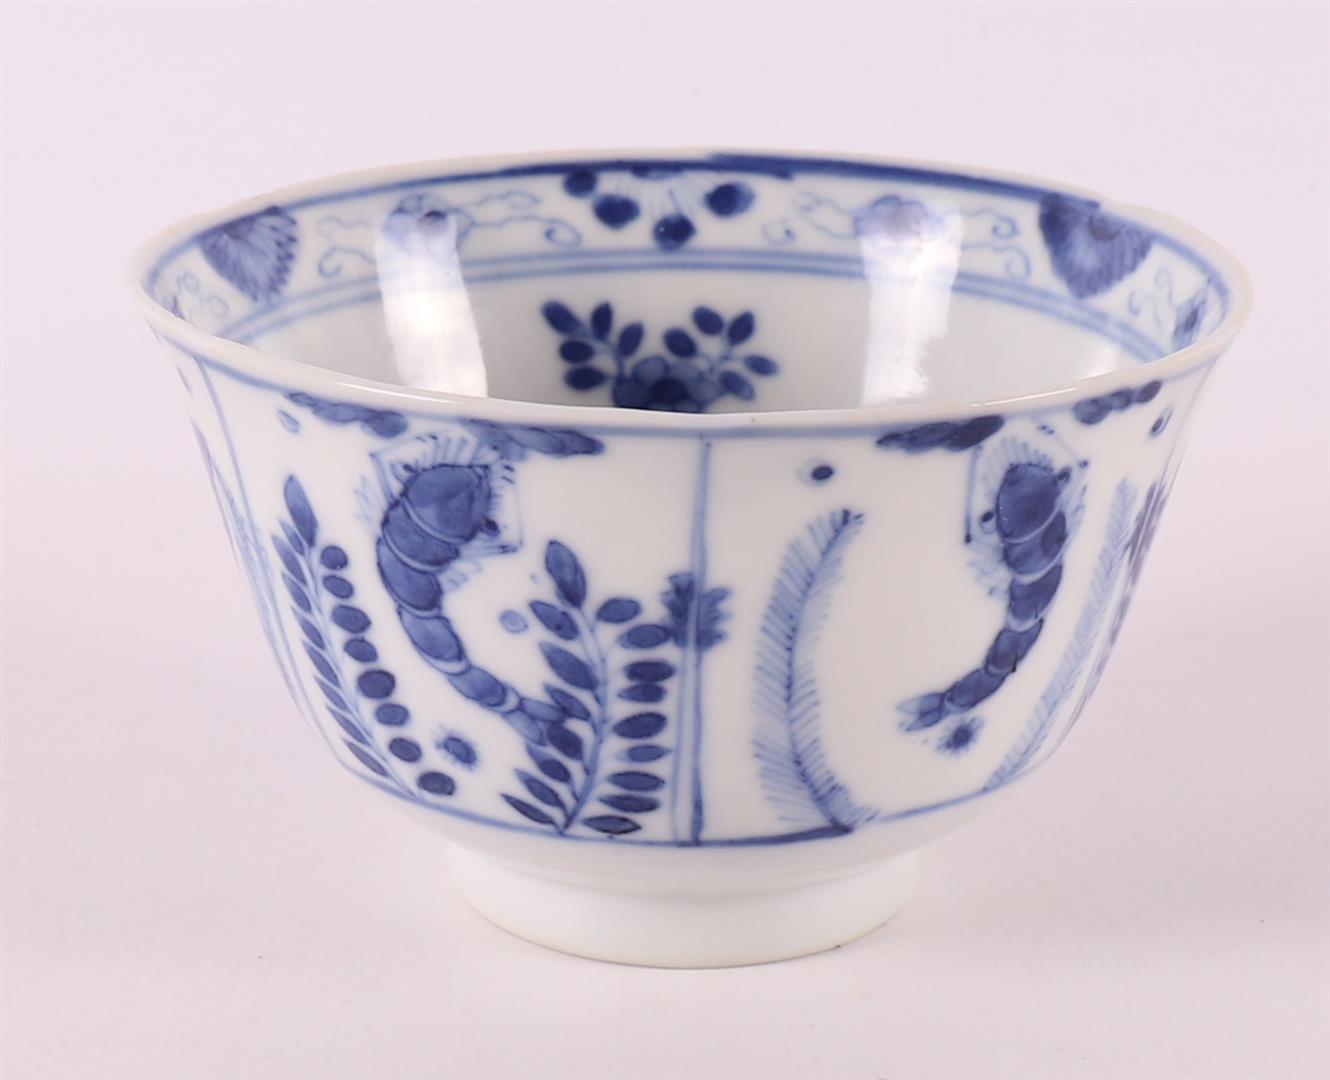 A blue and white porcelain bowl, China, 19th century.